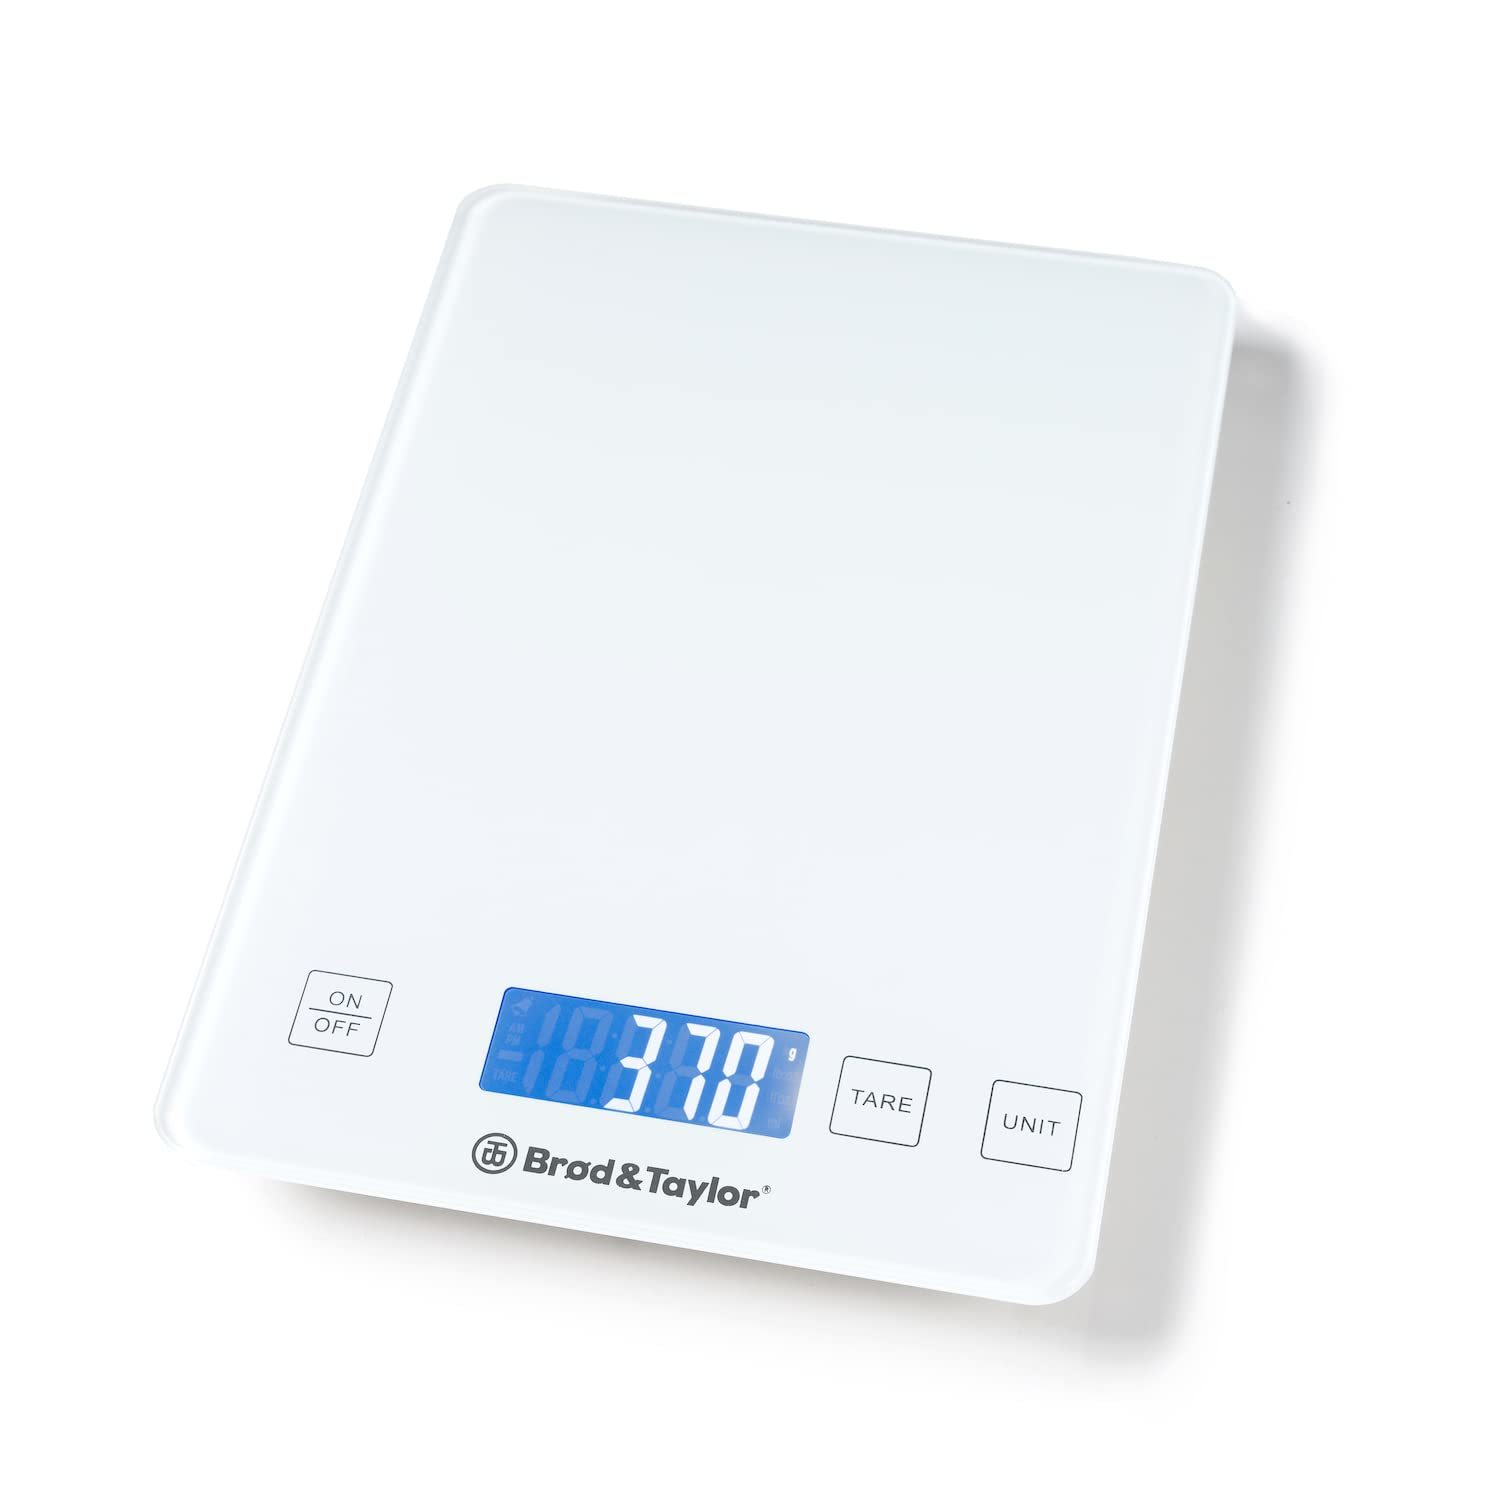 Brod & Taylor High Capacity Baking & Kitchen Scale | (15Kg / 33Lbs Max) - $36.99